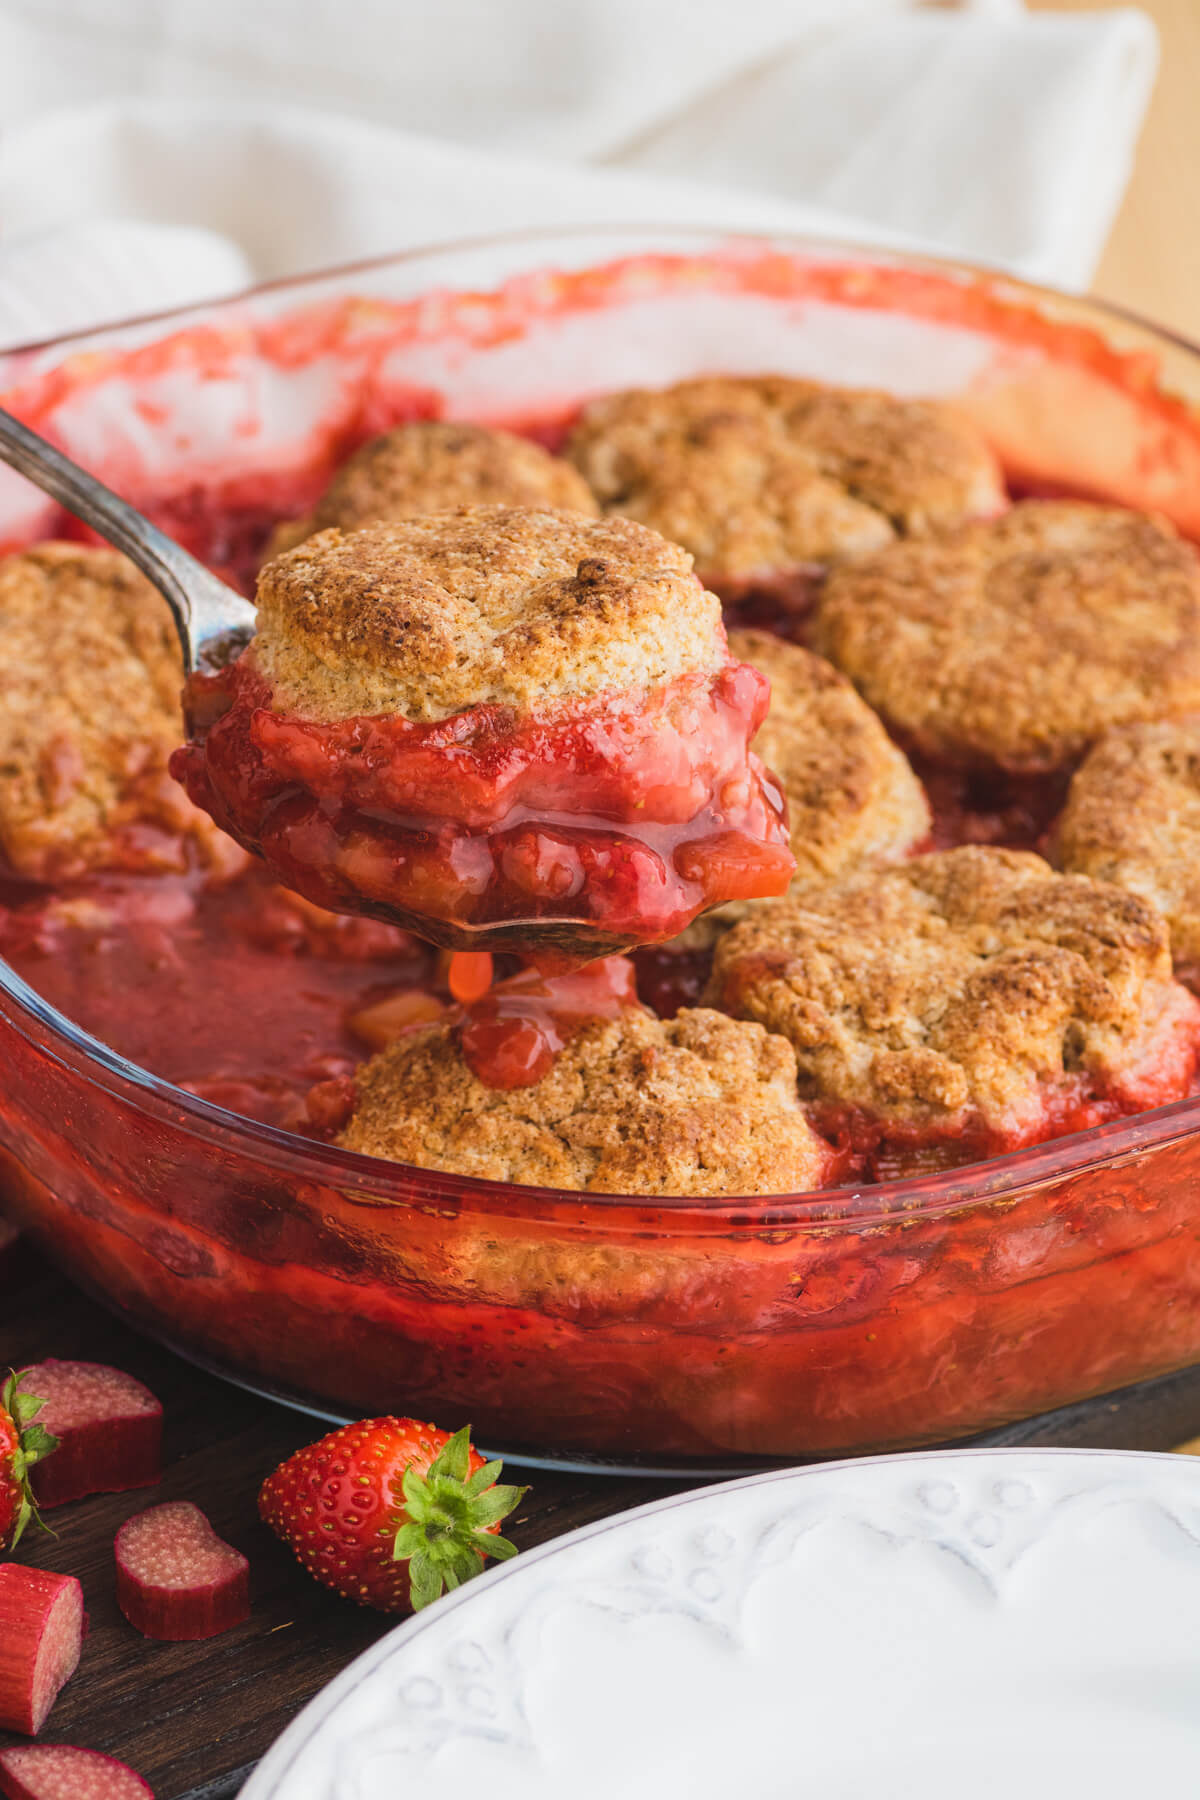 A silver vintage serving spoon serves up a portion of strawberry rhubarb cobbler.